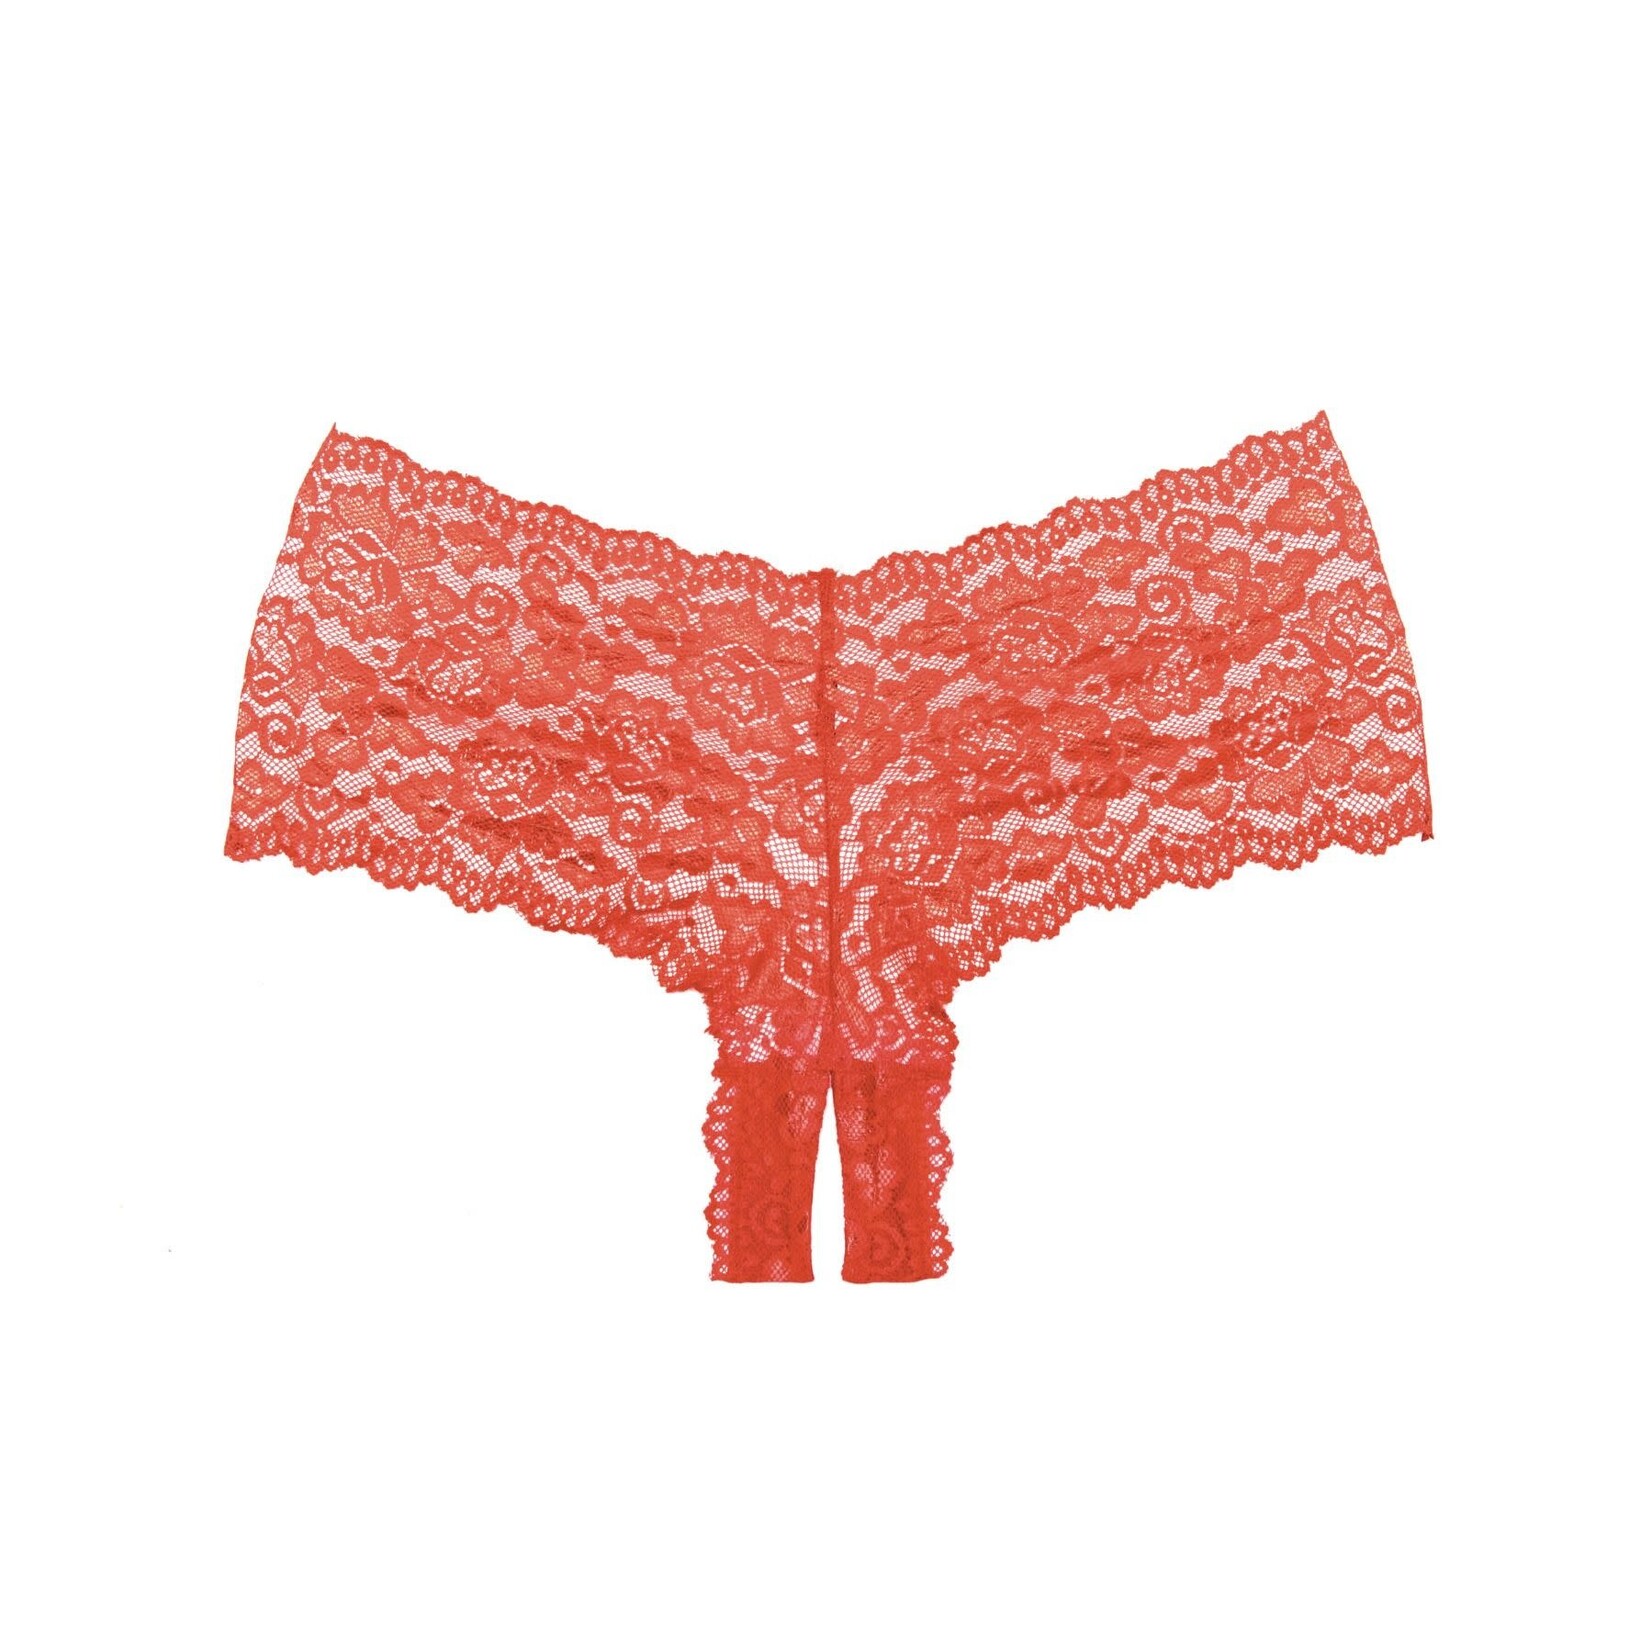 ALLURE LINGERIE ALLURE ADORE - CANDY APPLE PANTY - RED - ONE SIZE